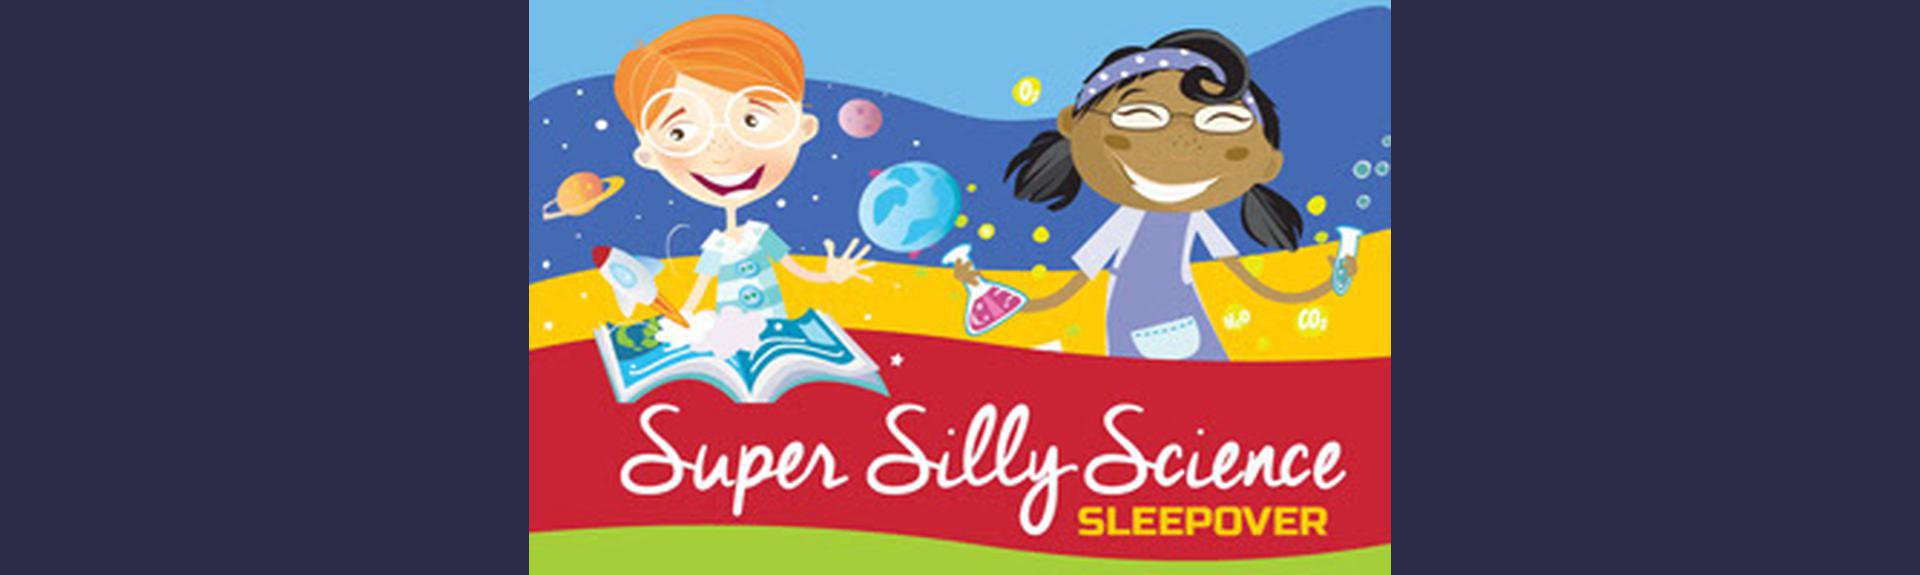 Cape Town Science Centre | Super Silly Science Sleepover 